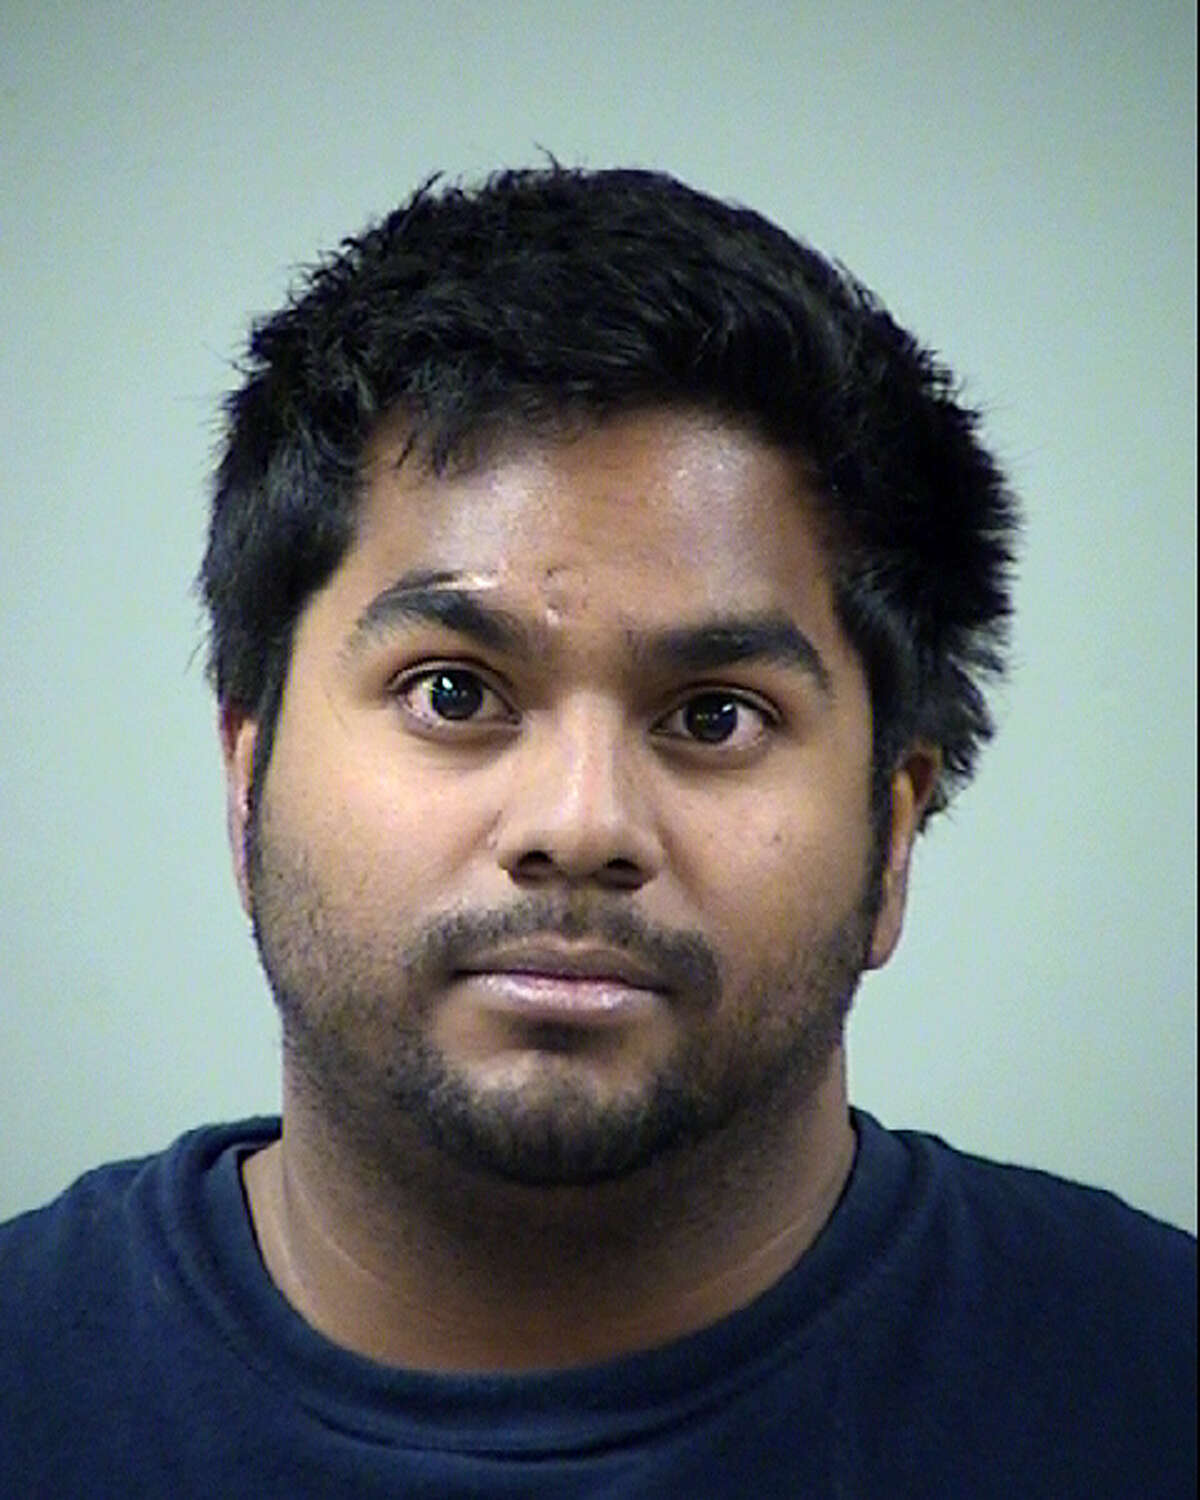 Prakash Mammen, 22, finance student at the University of Texas at San Antonio, charged with hazing in connection with a Sigma Phi Epsilon incident on Sept. 4, 2011.